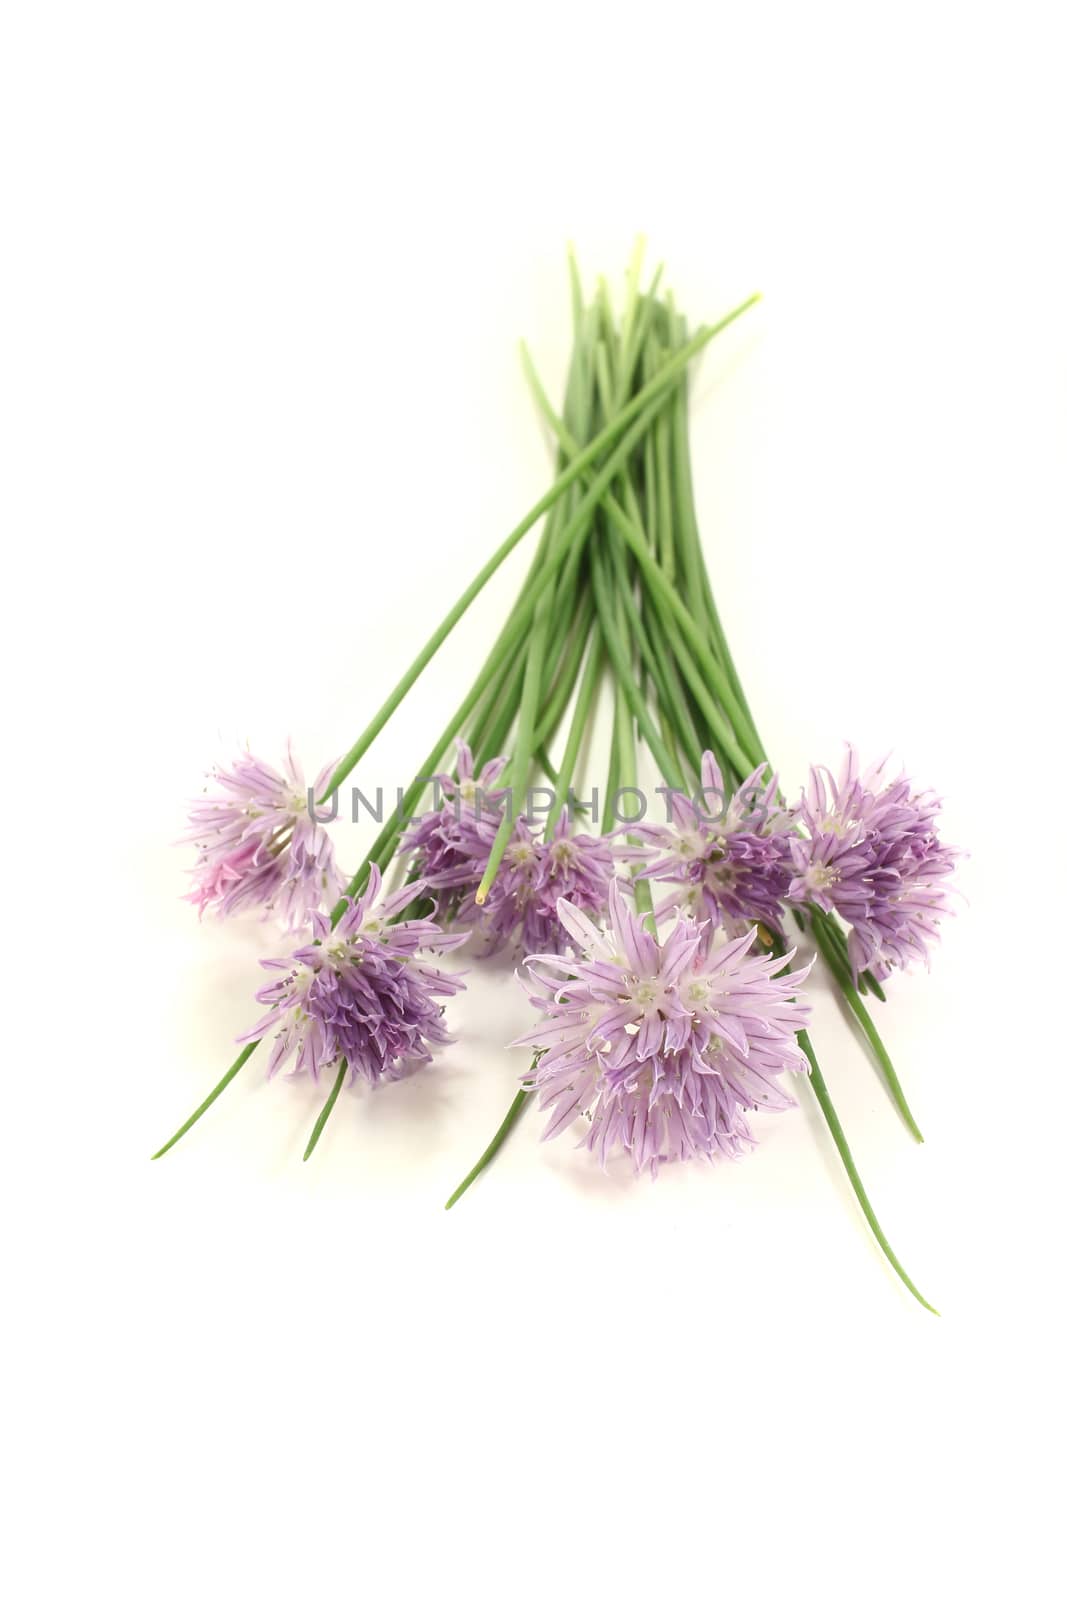 fresh chives with leaves and purple blossoms on a bright background